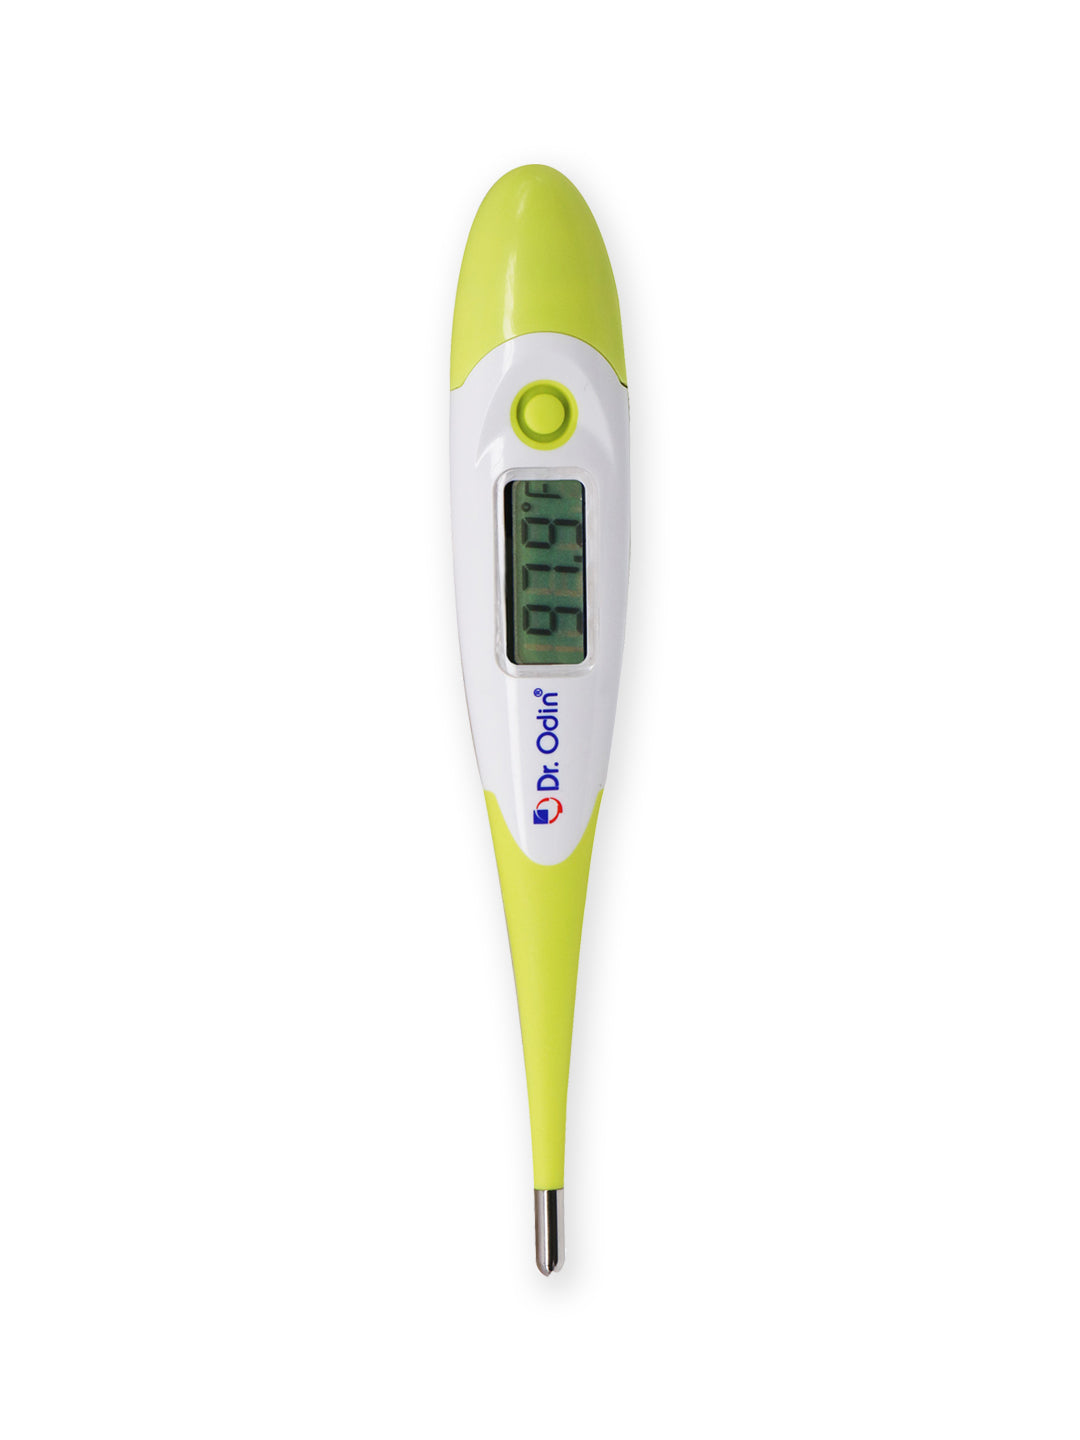 Accurate Digital Thermometer DMT4320 for Temperature Monitoring